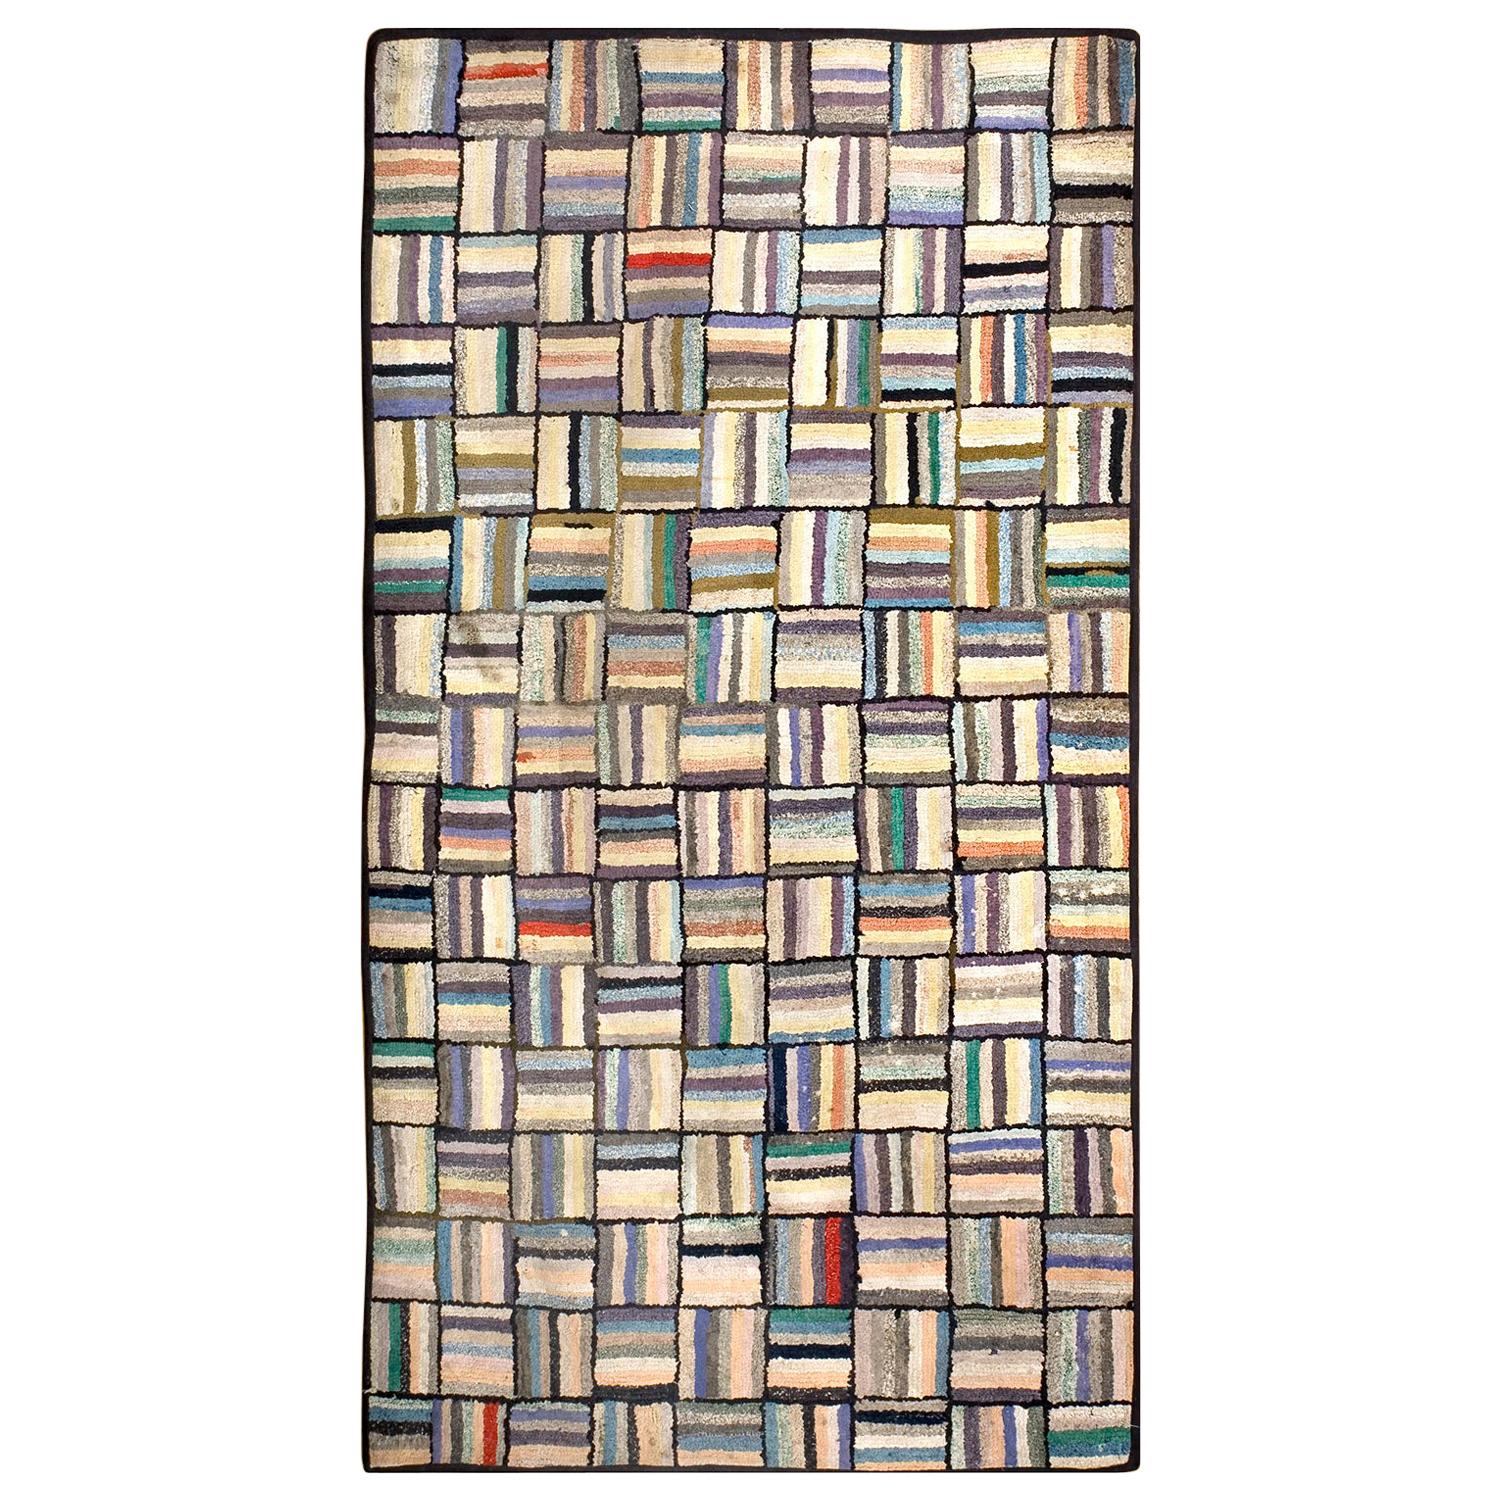 Early 20th Century American Hooked Rug ( 3'2" x 6' - 97 x 183 )